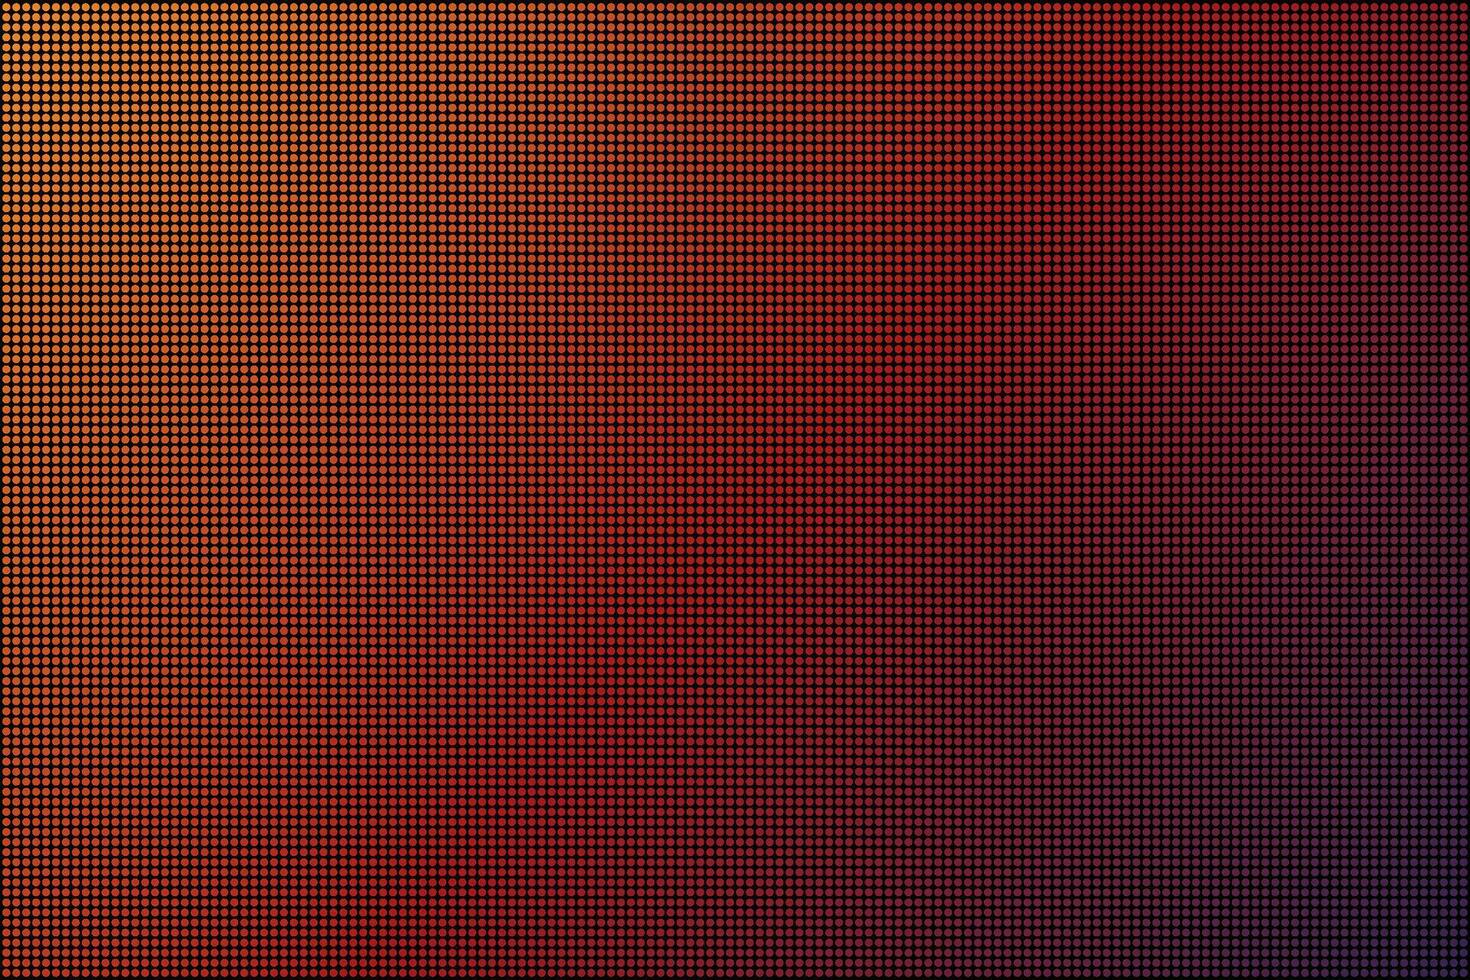 Led screen. Dot RGB Background television. Vector stock illustration